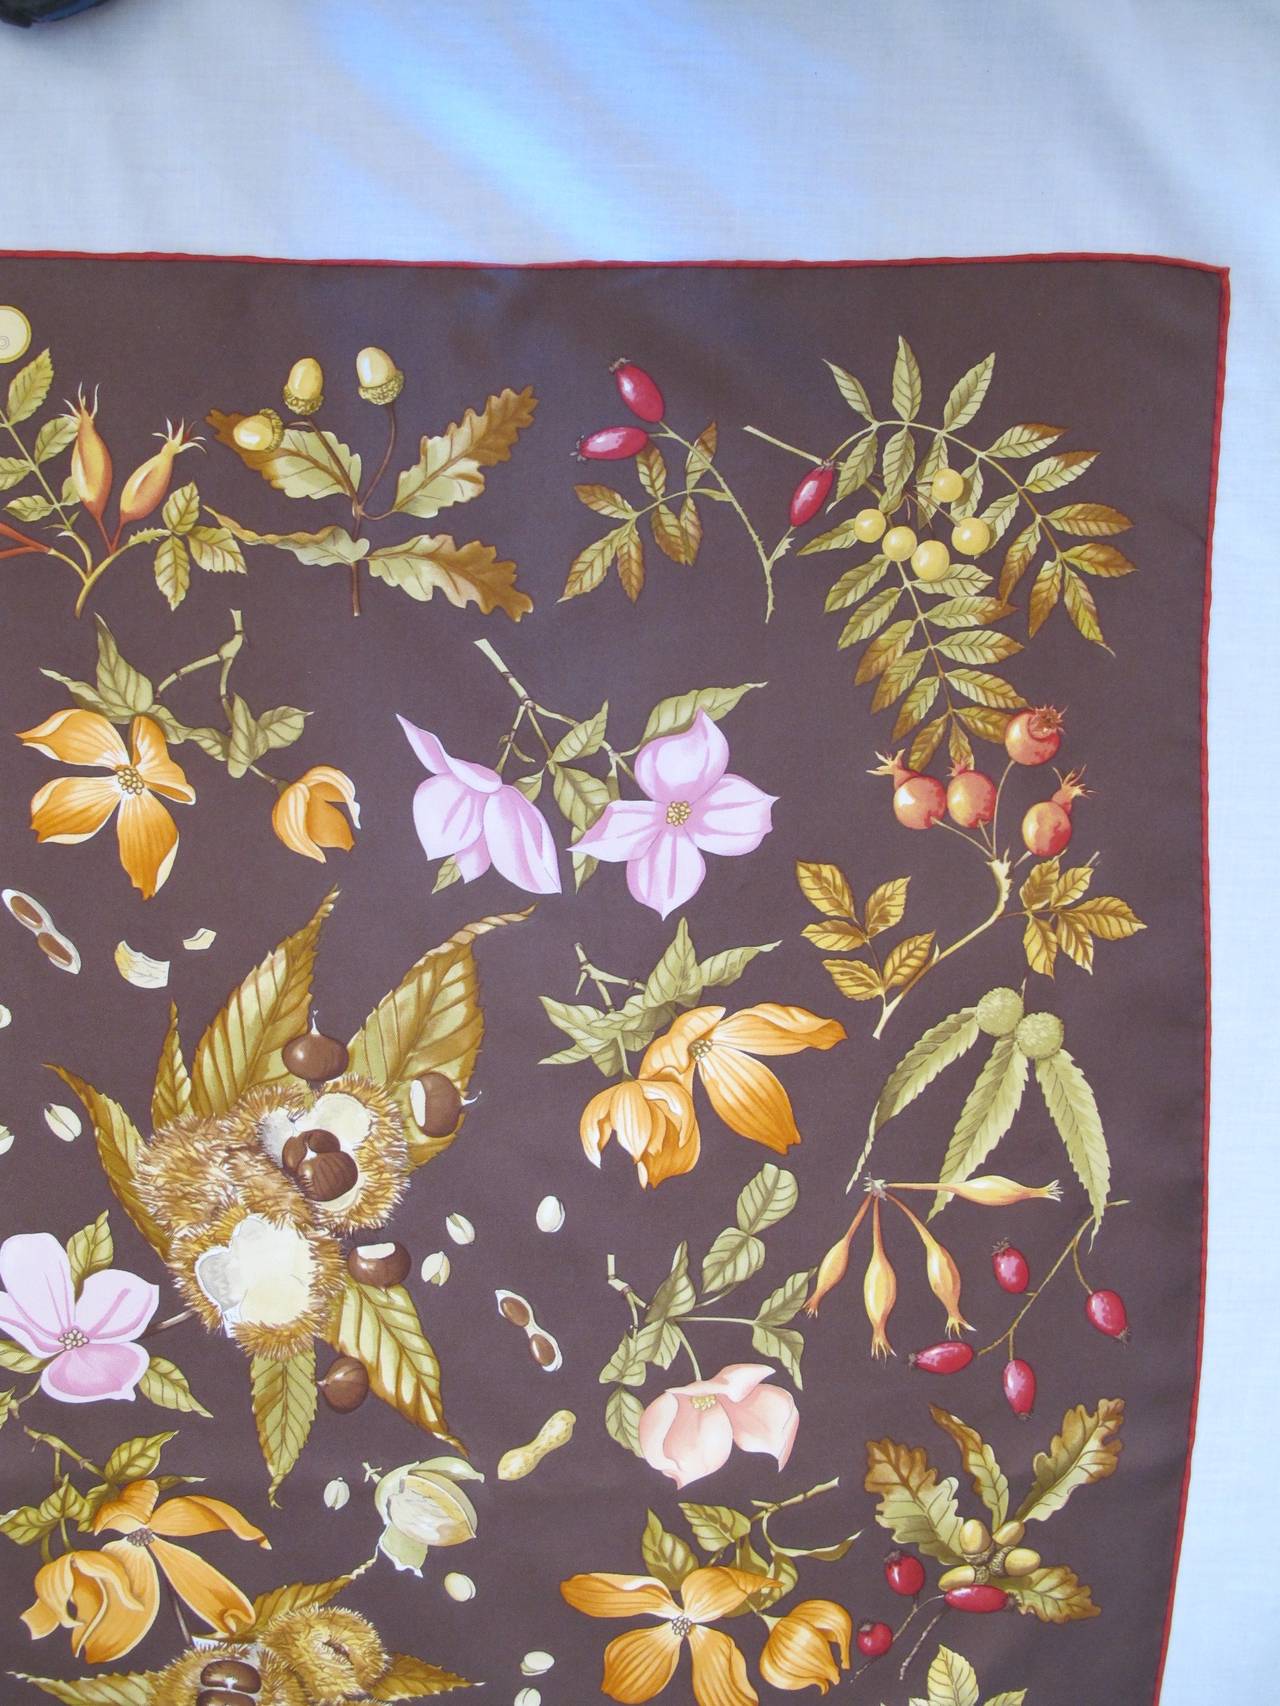 This scarf celebrates Autumn with the feeling of spring and blossoms. The background is a mixture of taupe and sable. Acorns are scattered throughout the scarf. The maroon border is hand rolled.